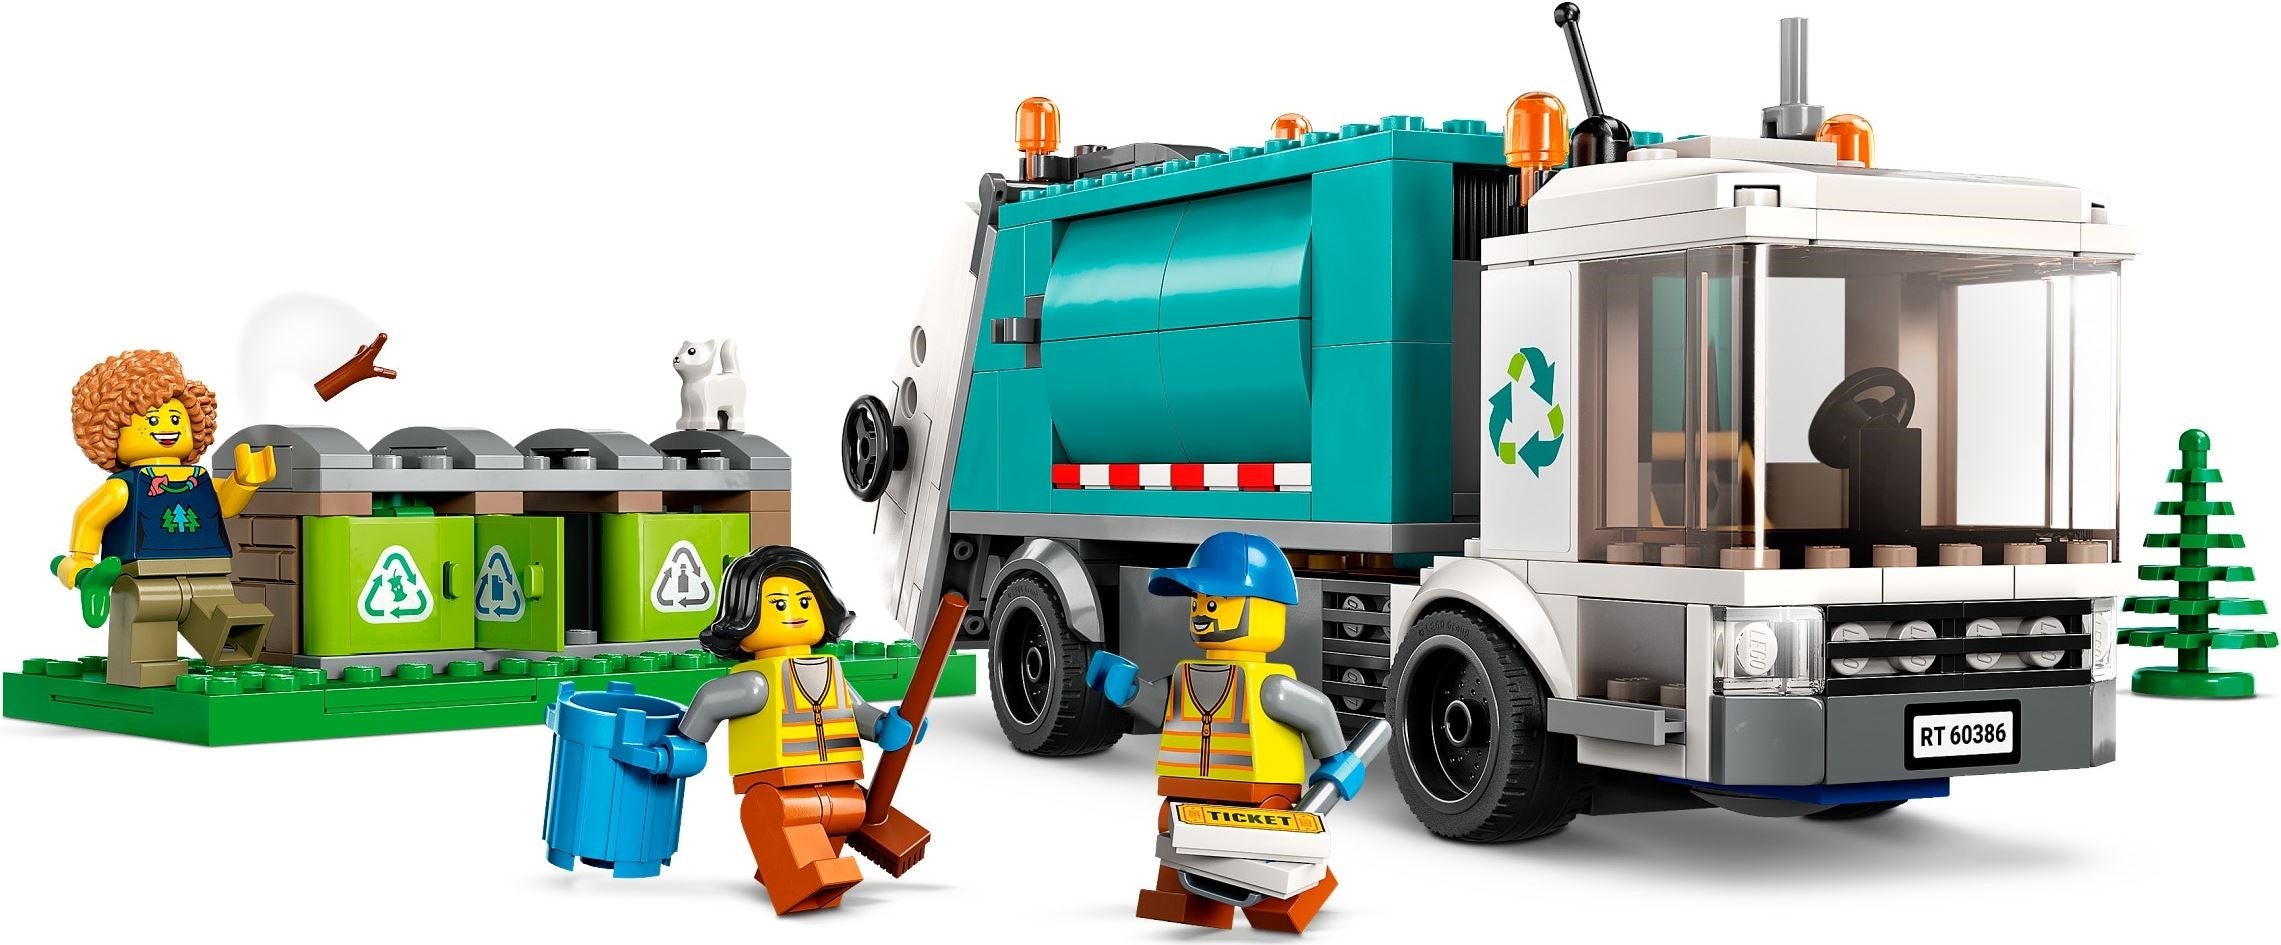 LEGO 60386 Recycling Truck